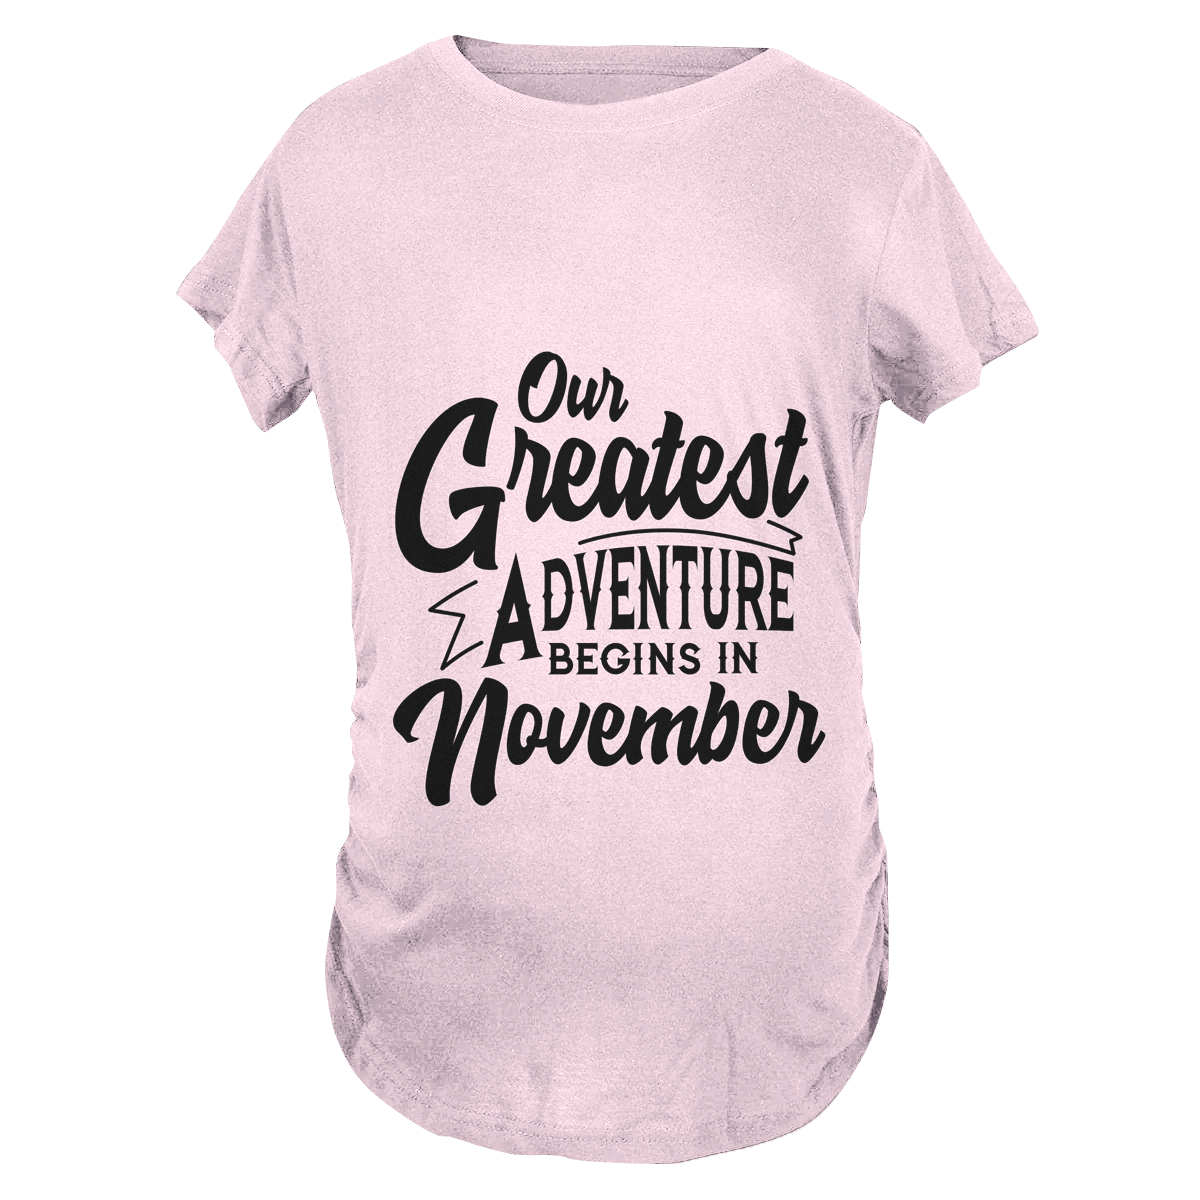 Our Greatest Adventure Begins in November Maternity T-Shirt